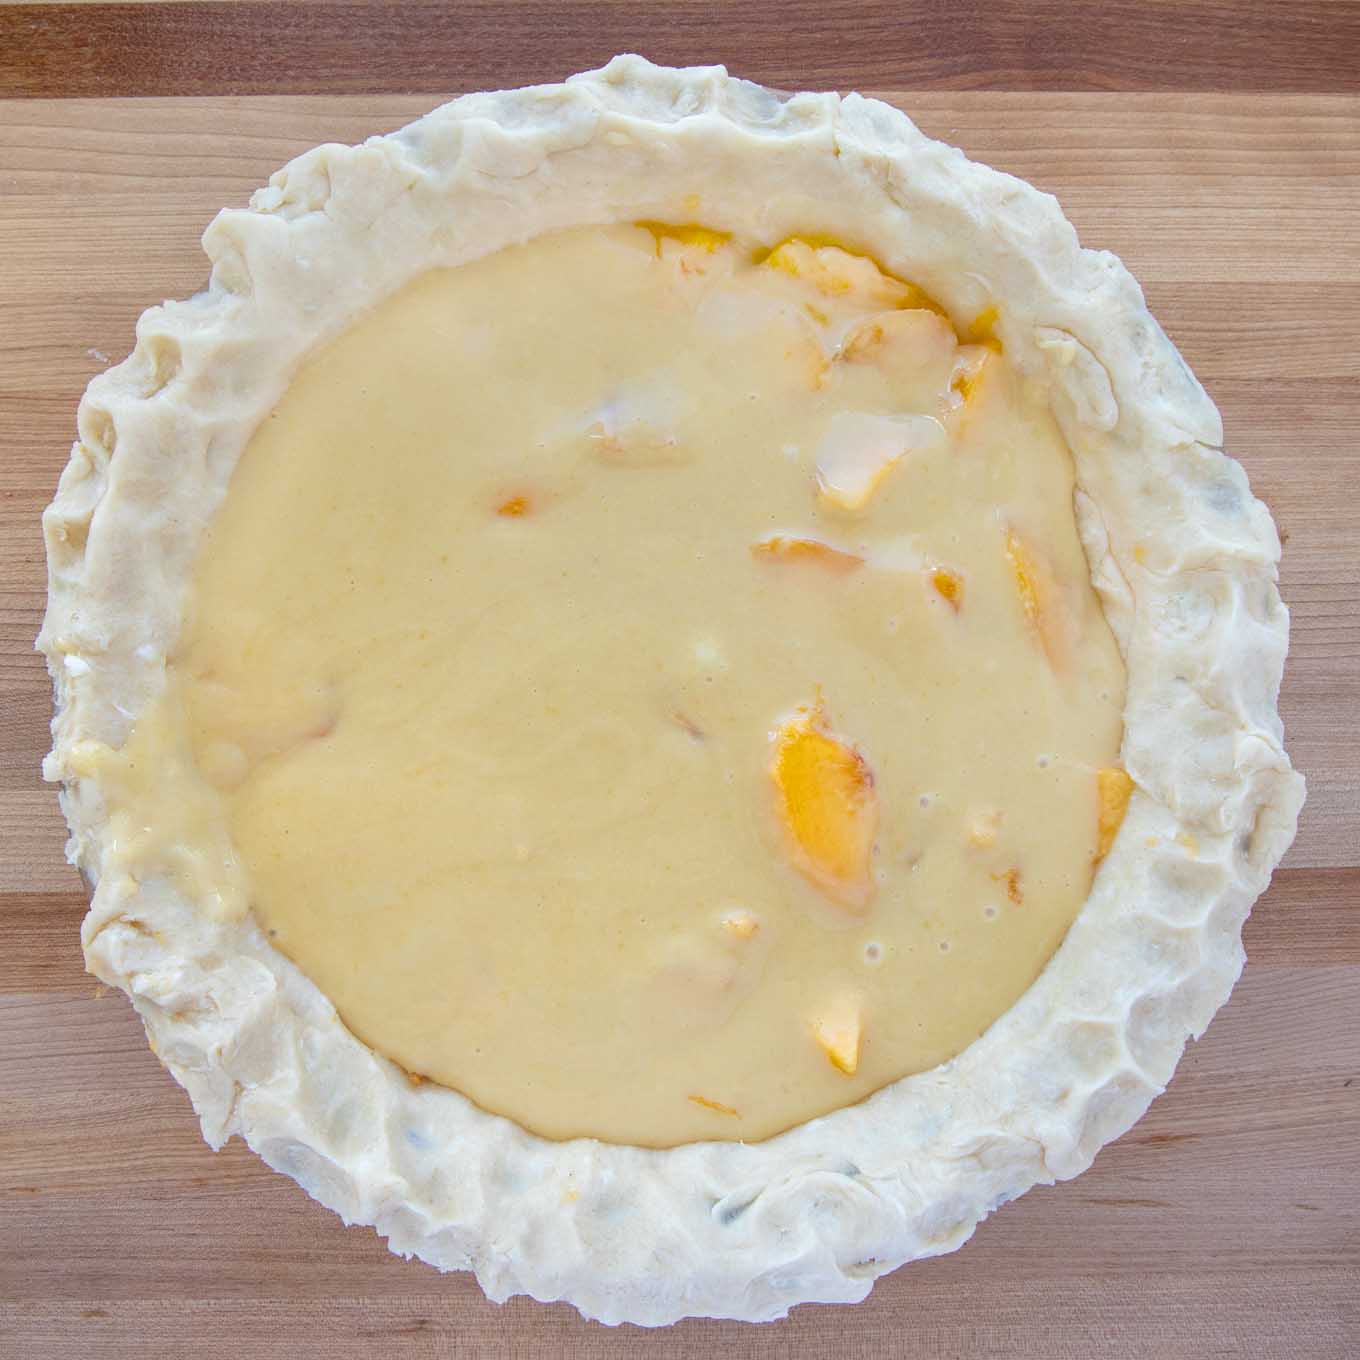 custard over the layer of peaches in an unbaked pie shell